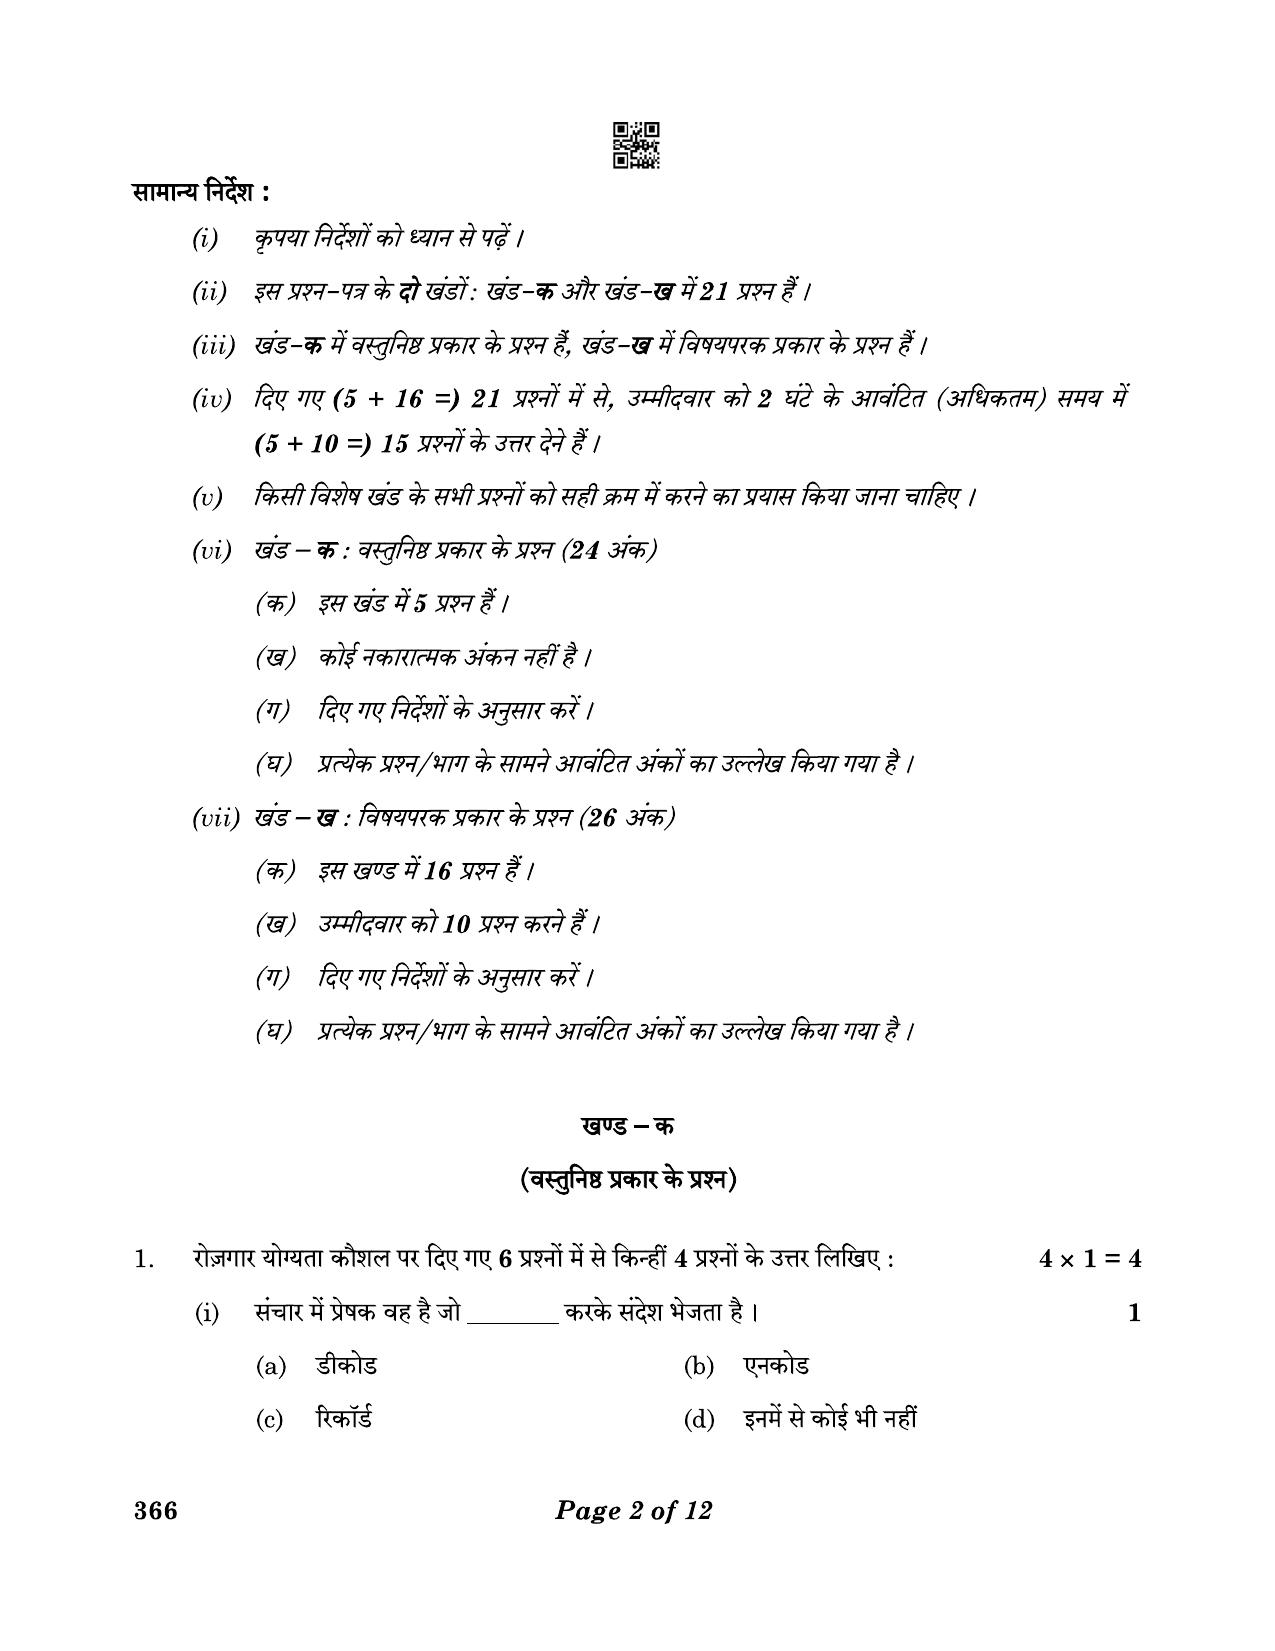 CBSE Class 12 366_Early Childhood Care & Education 2023 Question Paper - Page 2